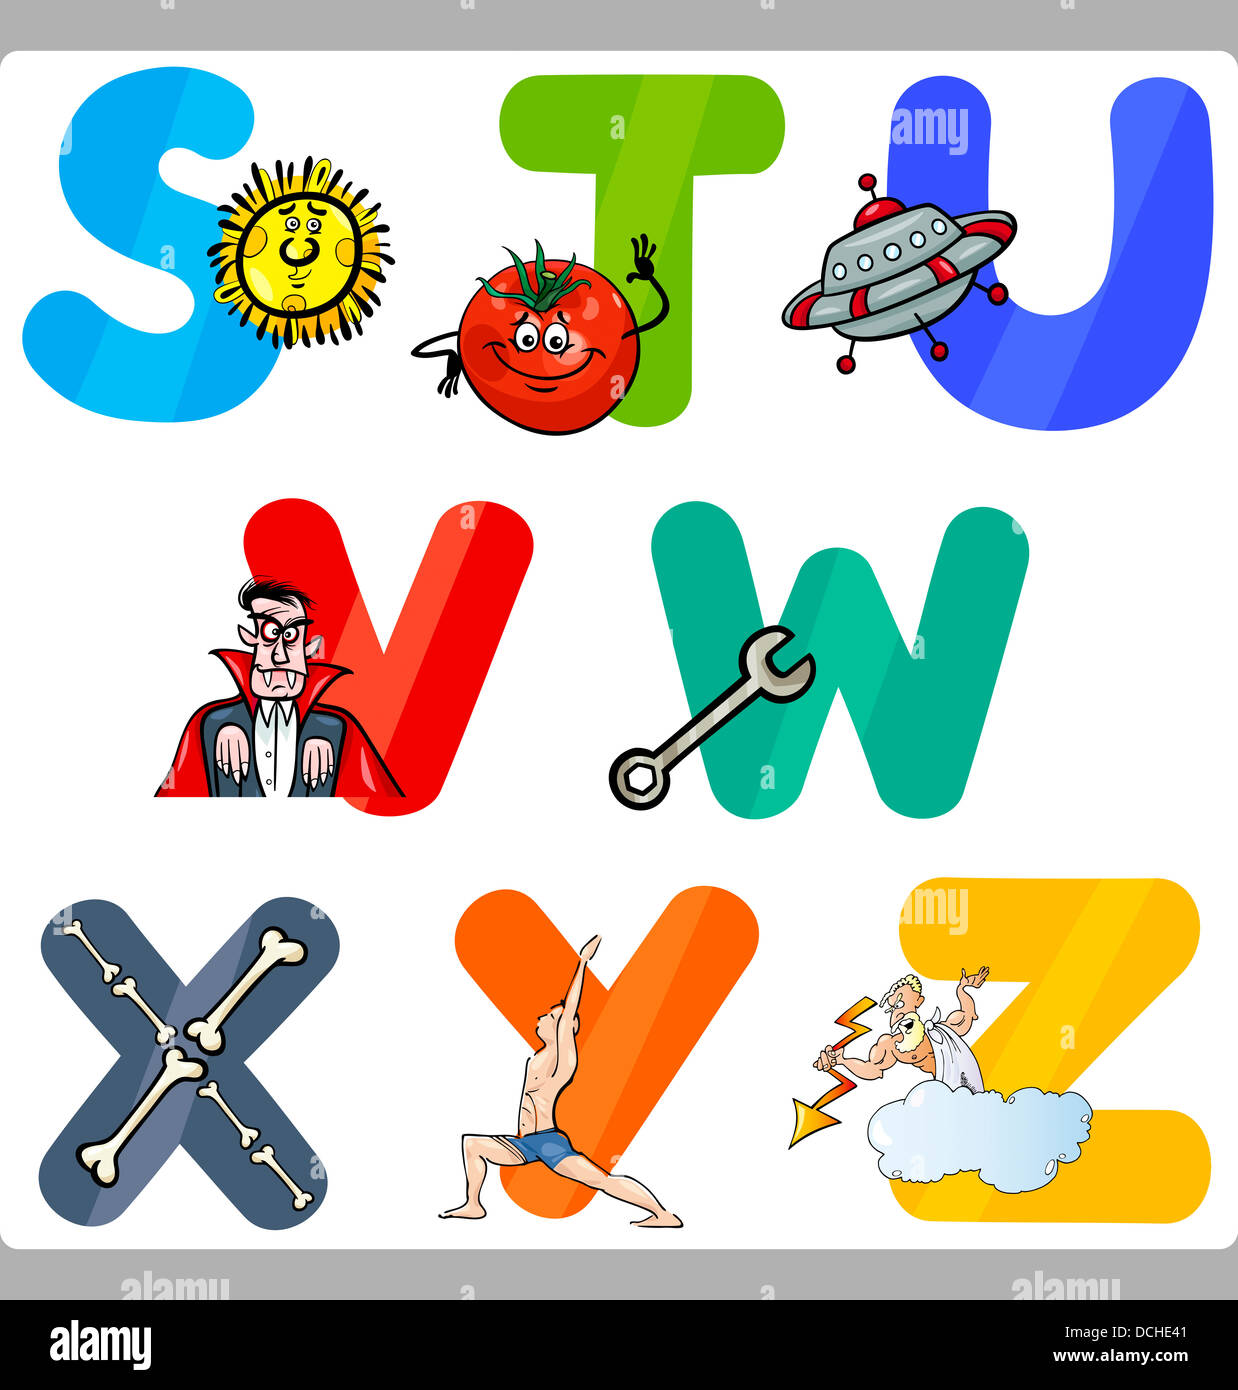 Cartoon Illustration Of Funny Capital Letters Alphabet With Objects